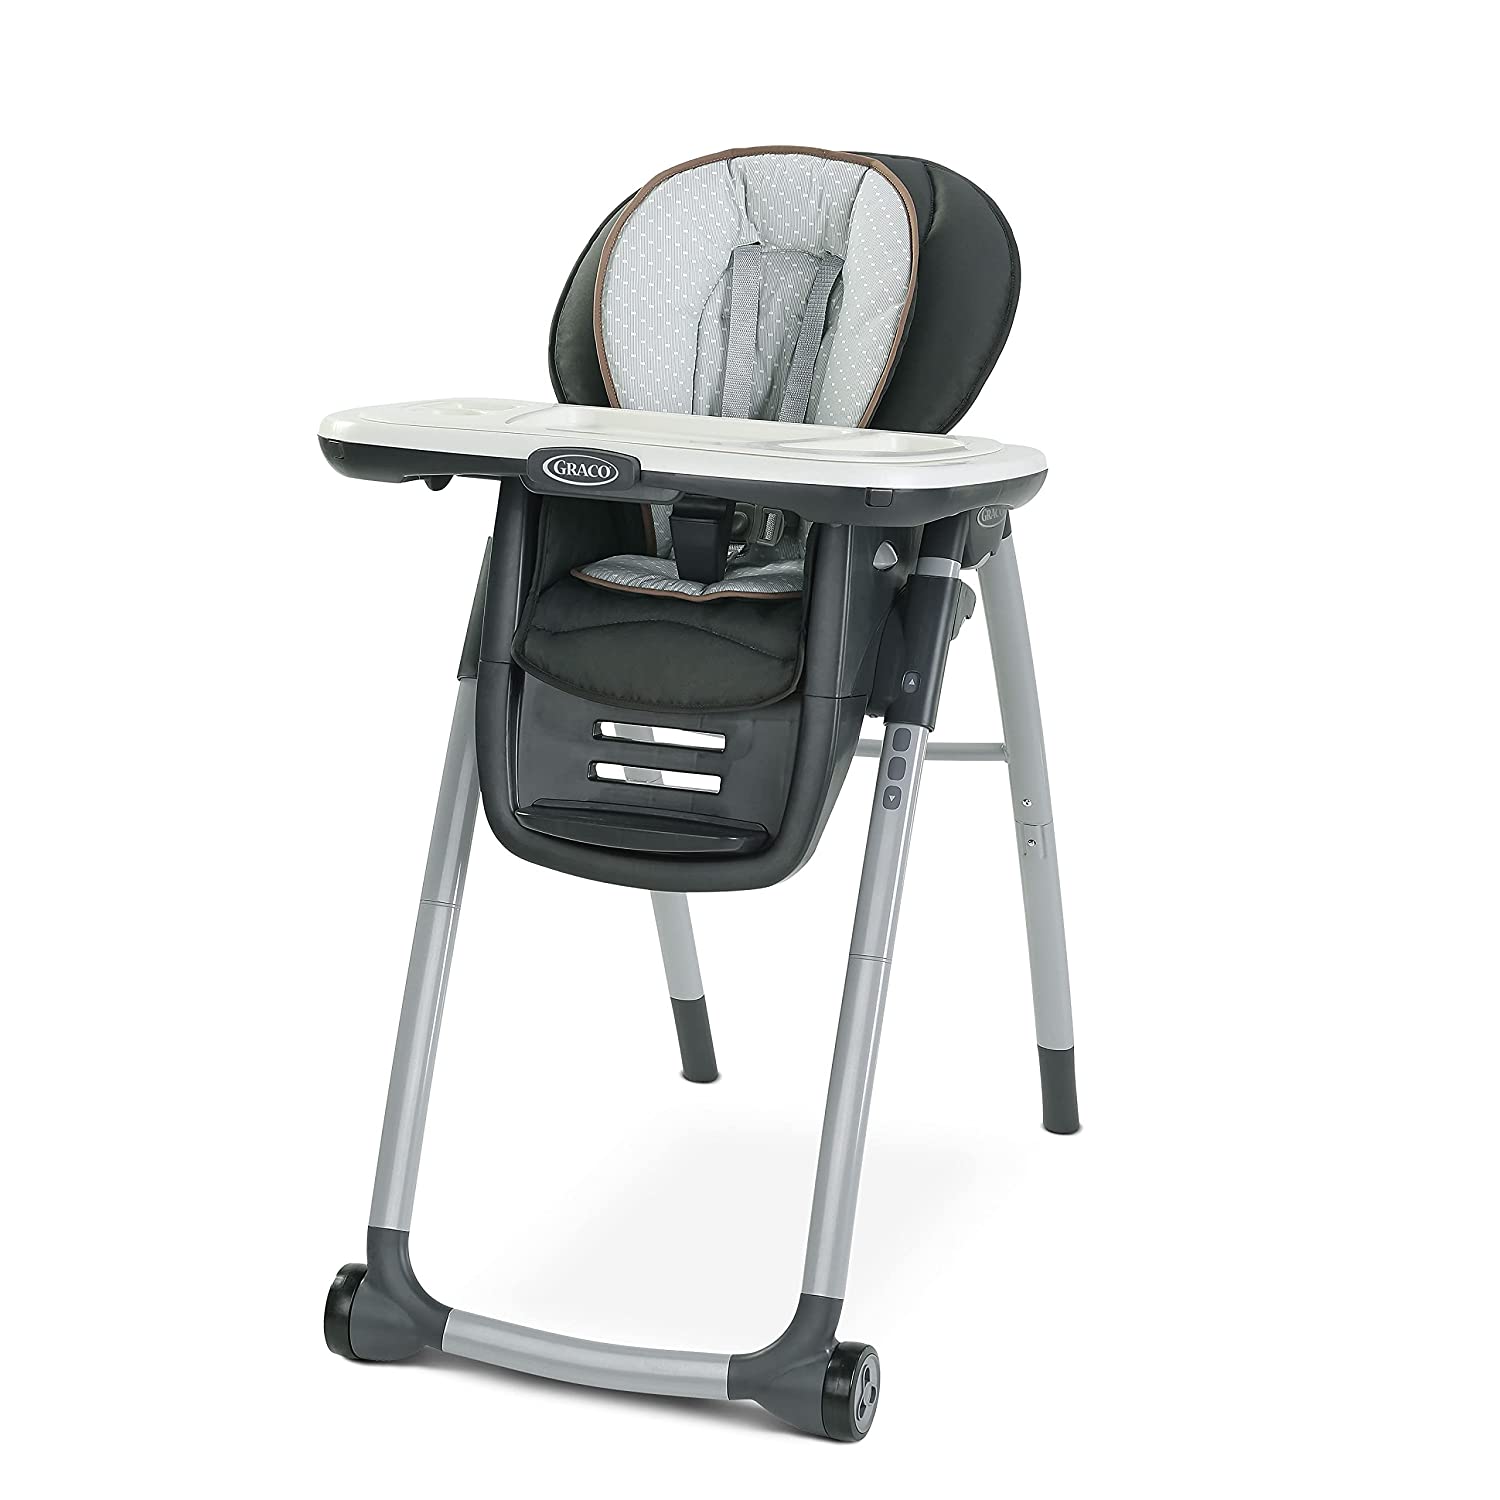 Graco Premier Fold 7 in 1 Convertible High Chair